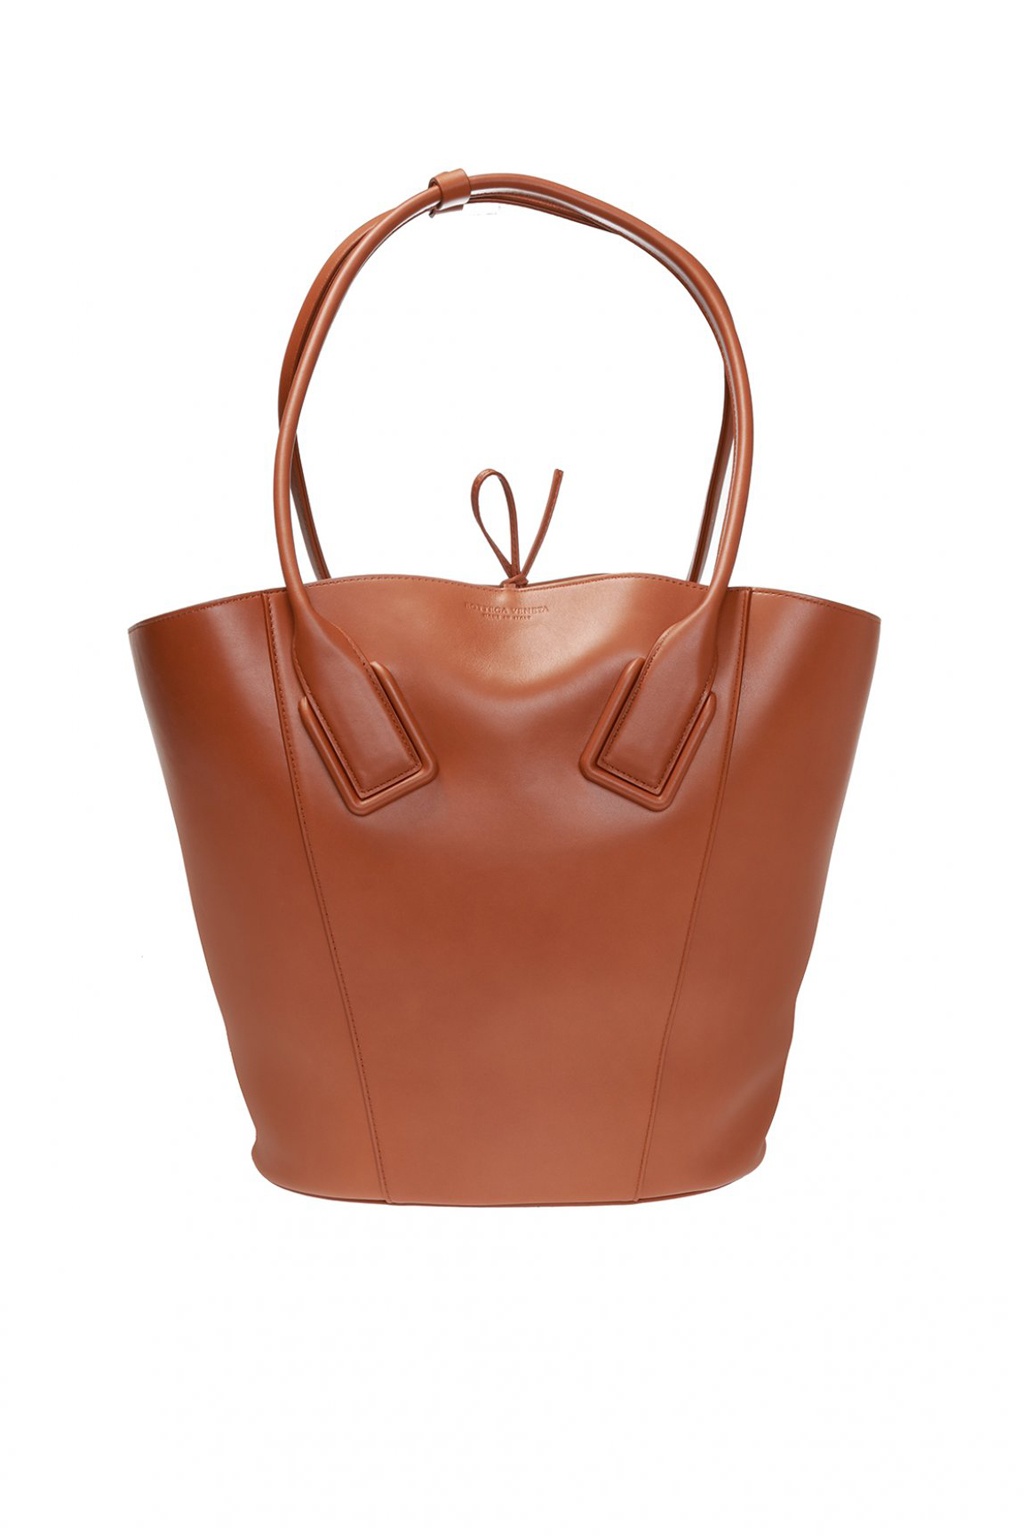 NAPPA LEATHER TOTE BAG - LIMITED EDITION